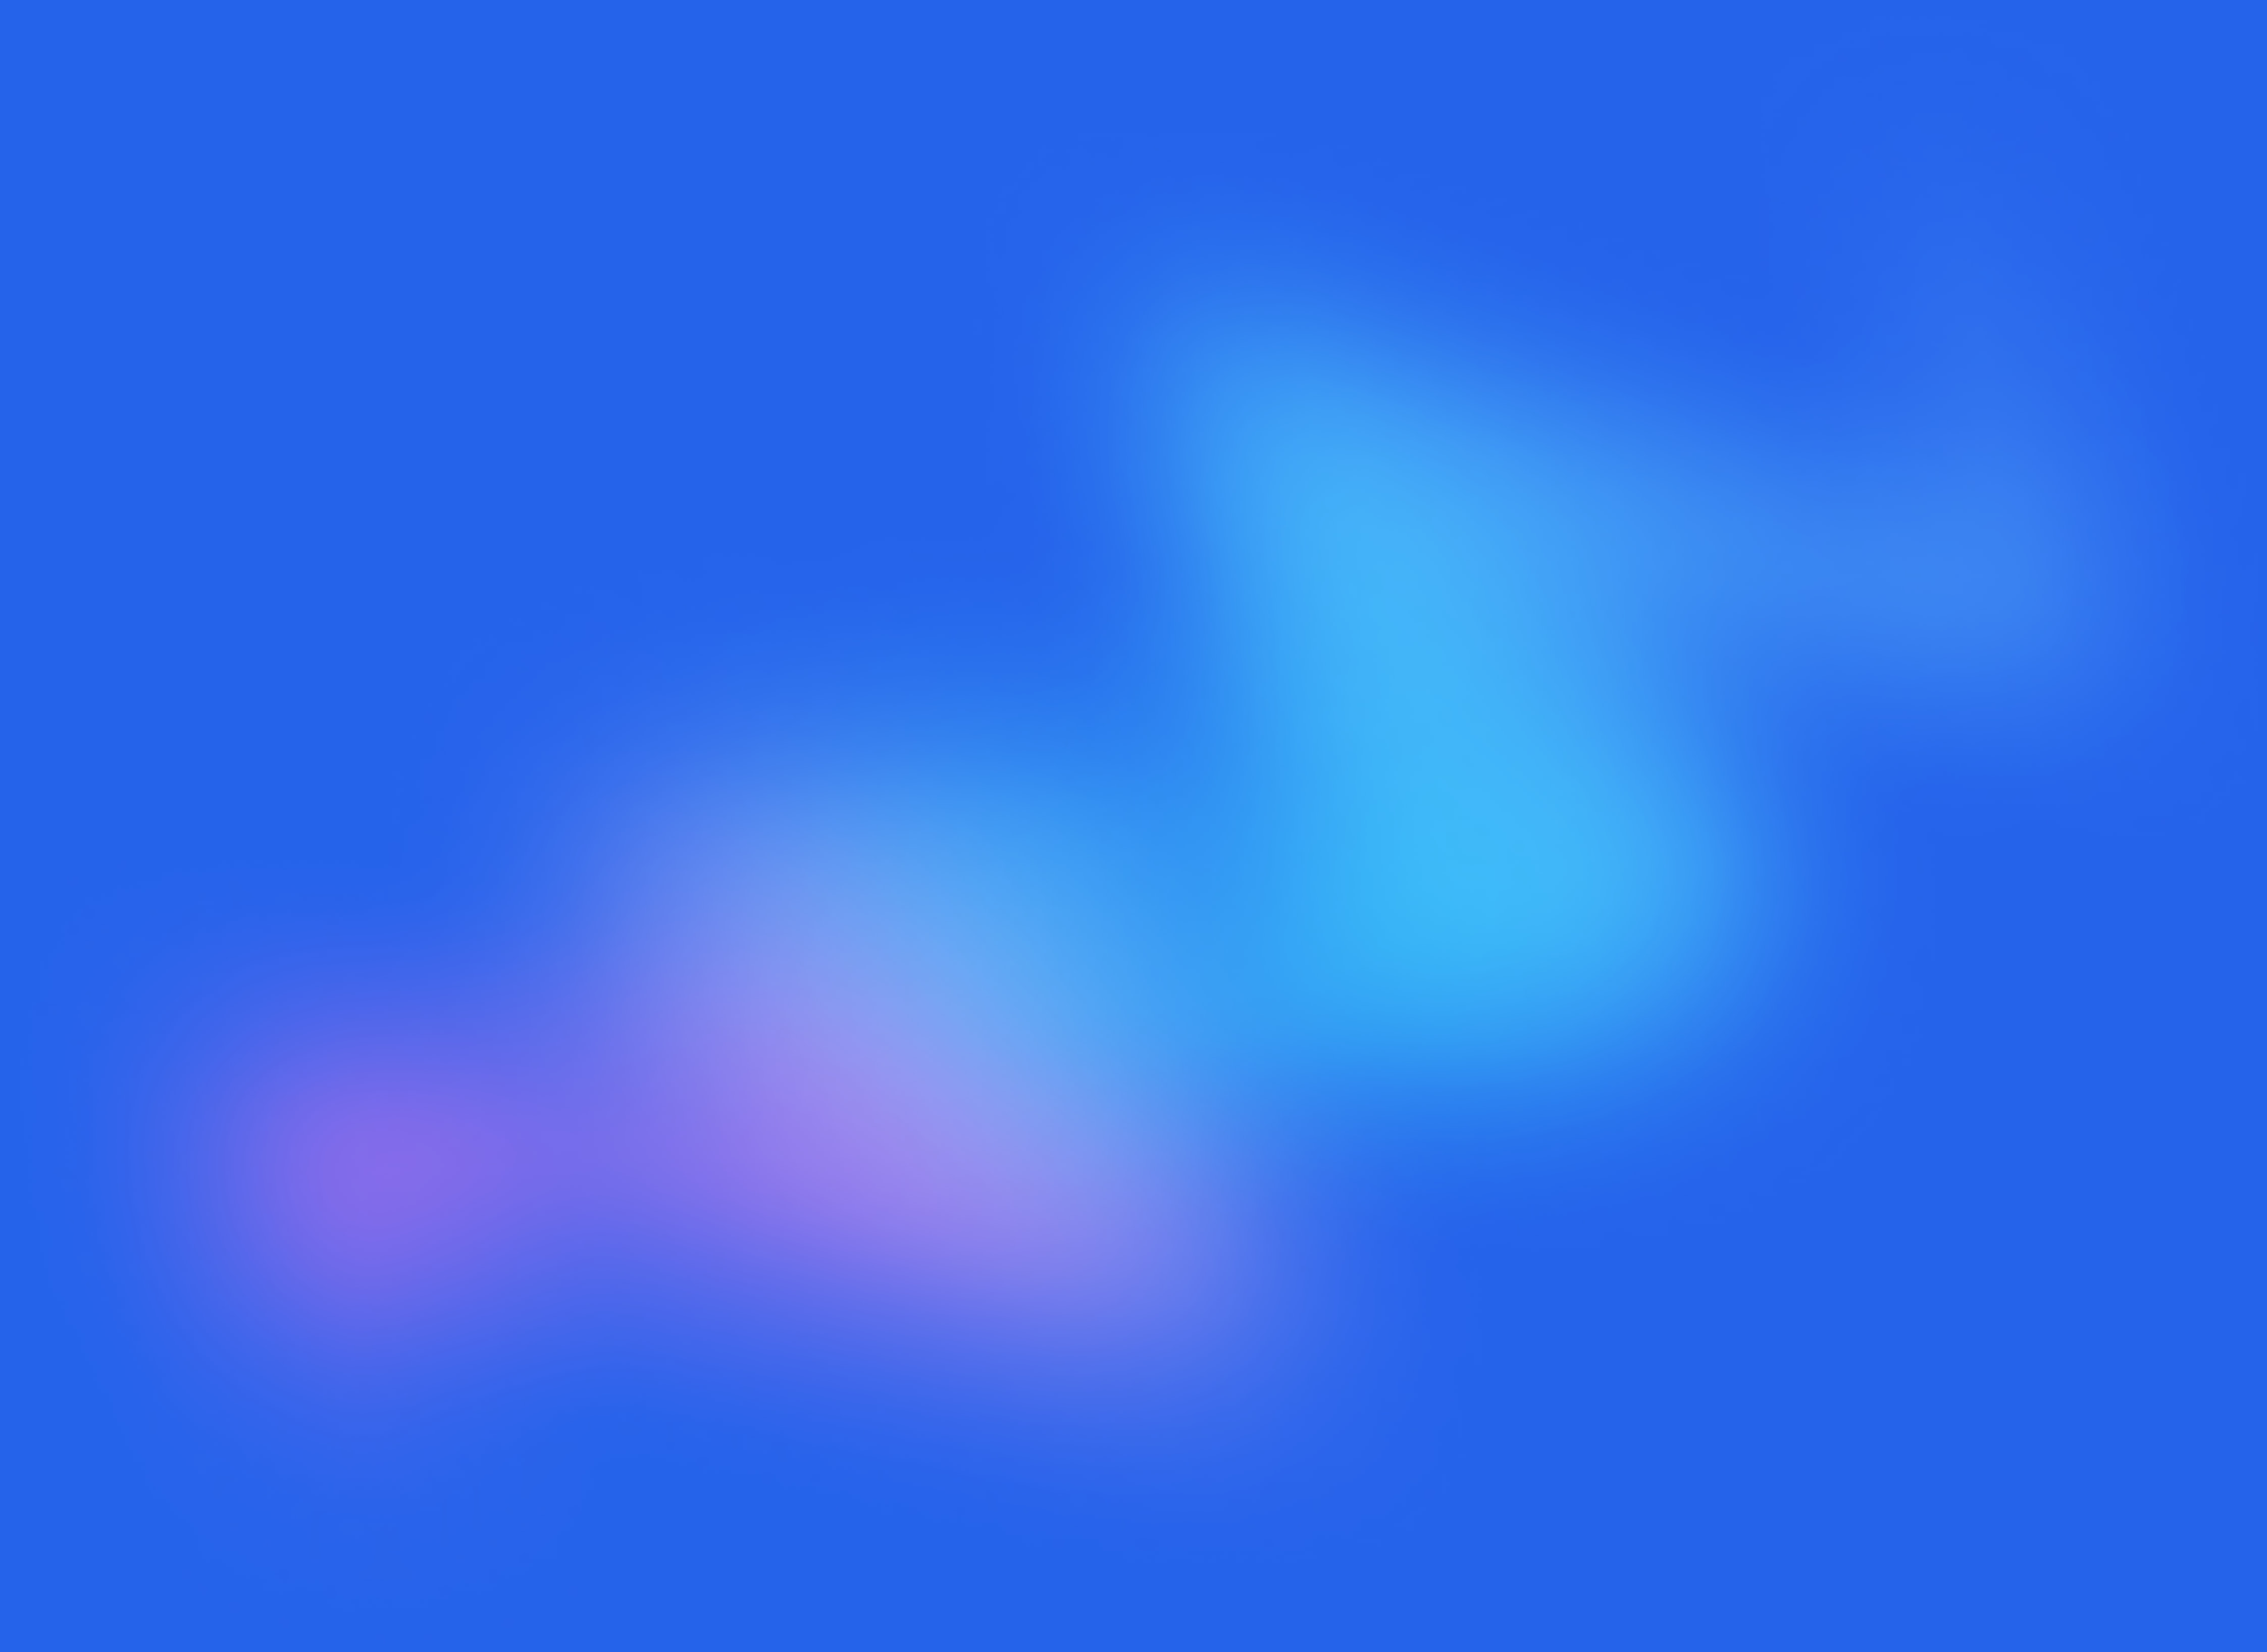 A background gradient image with shades of blue and purple.